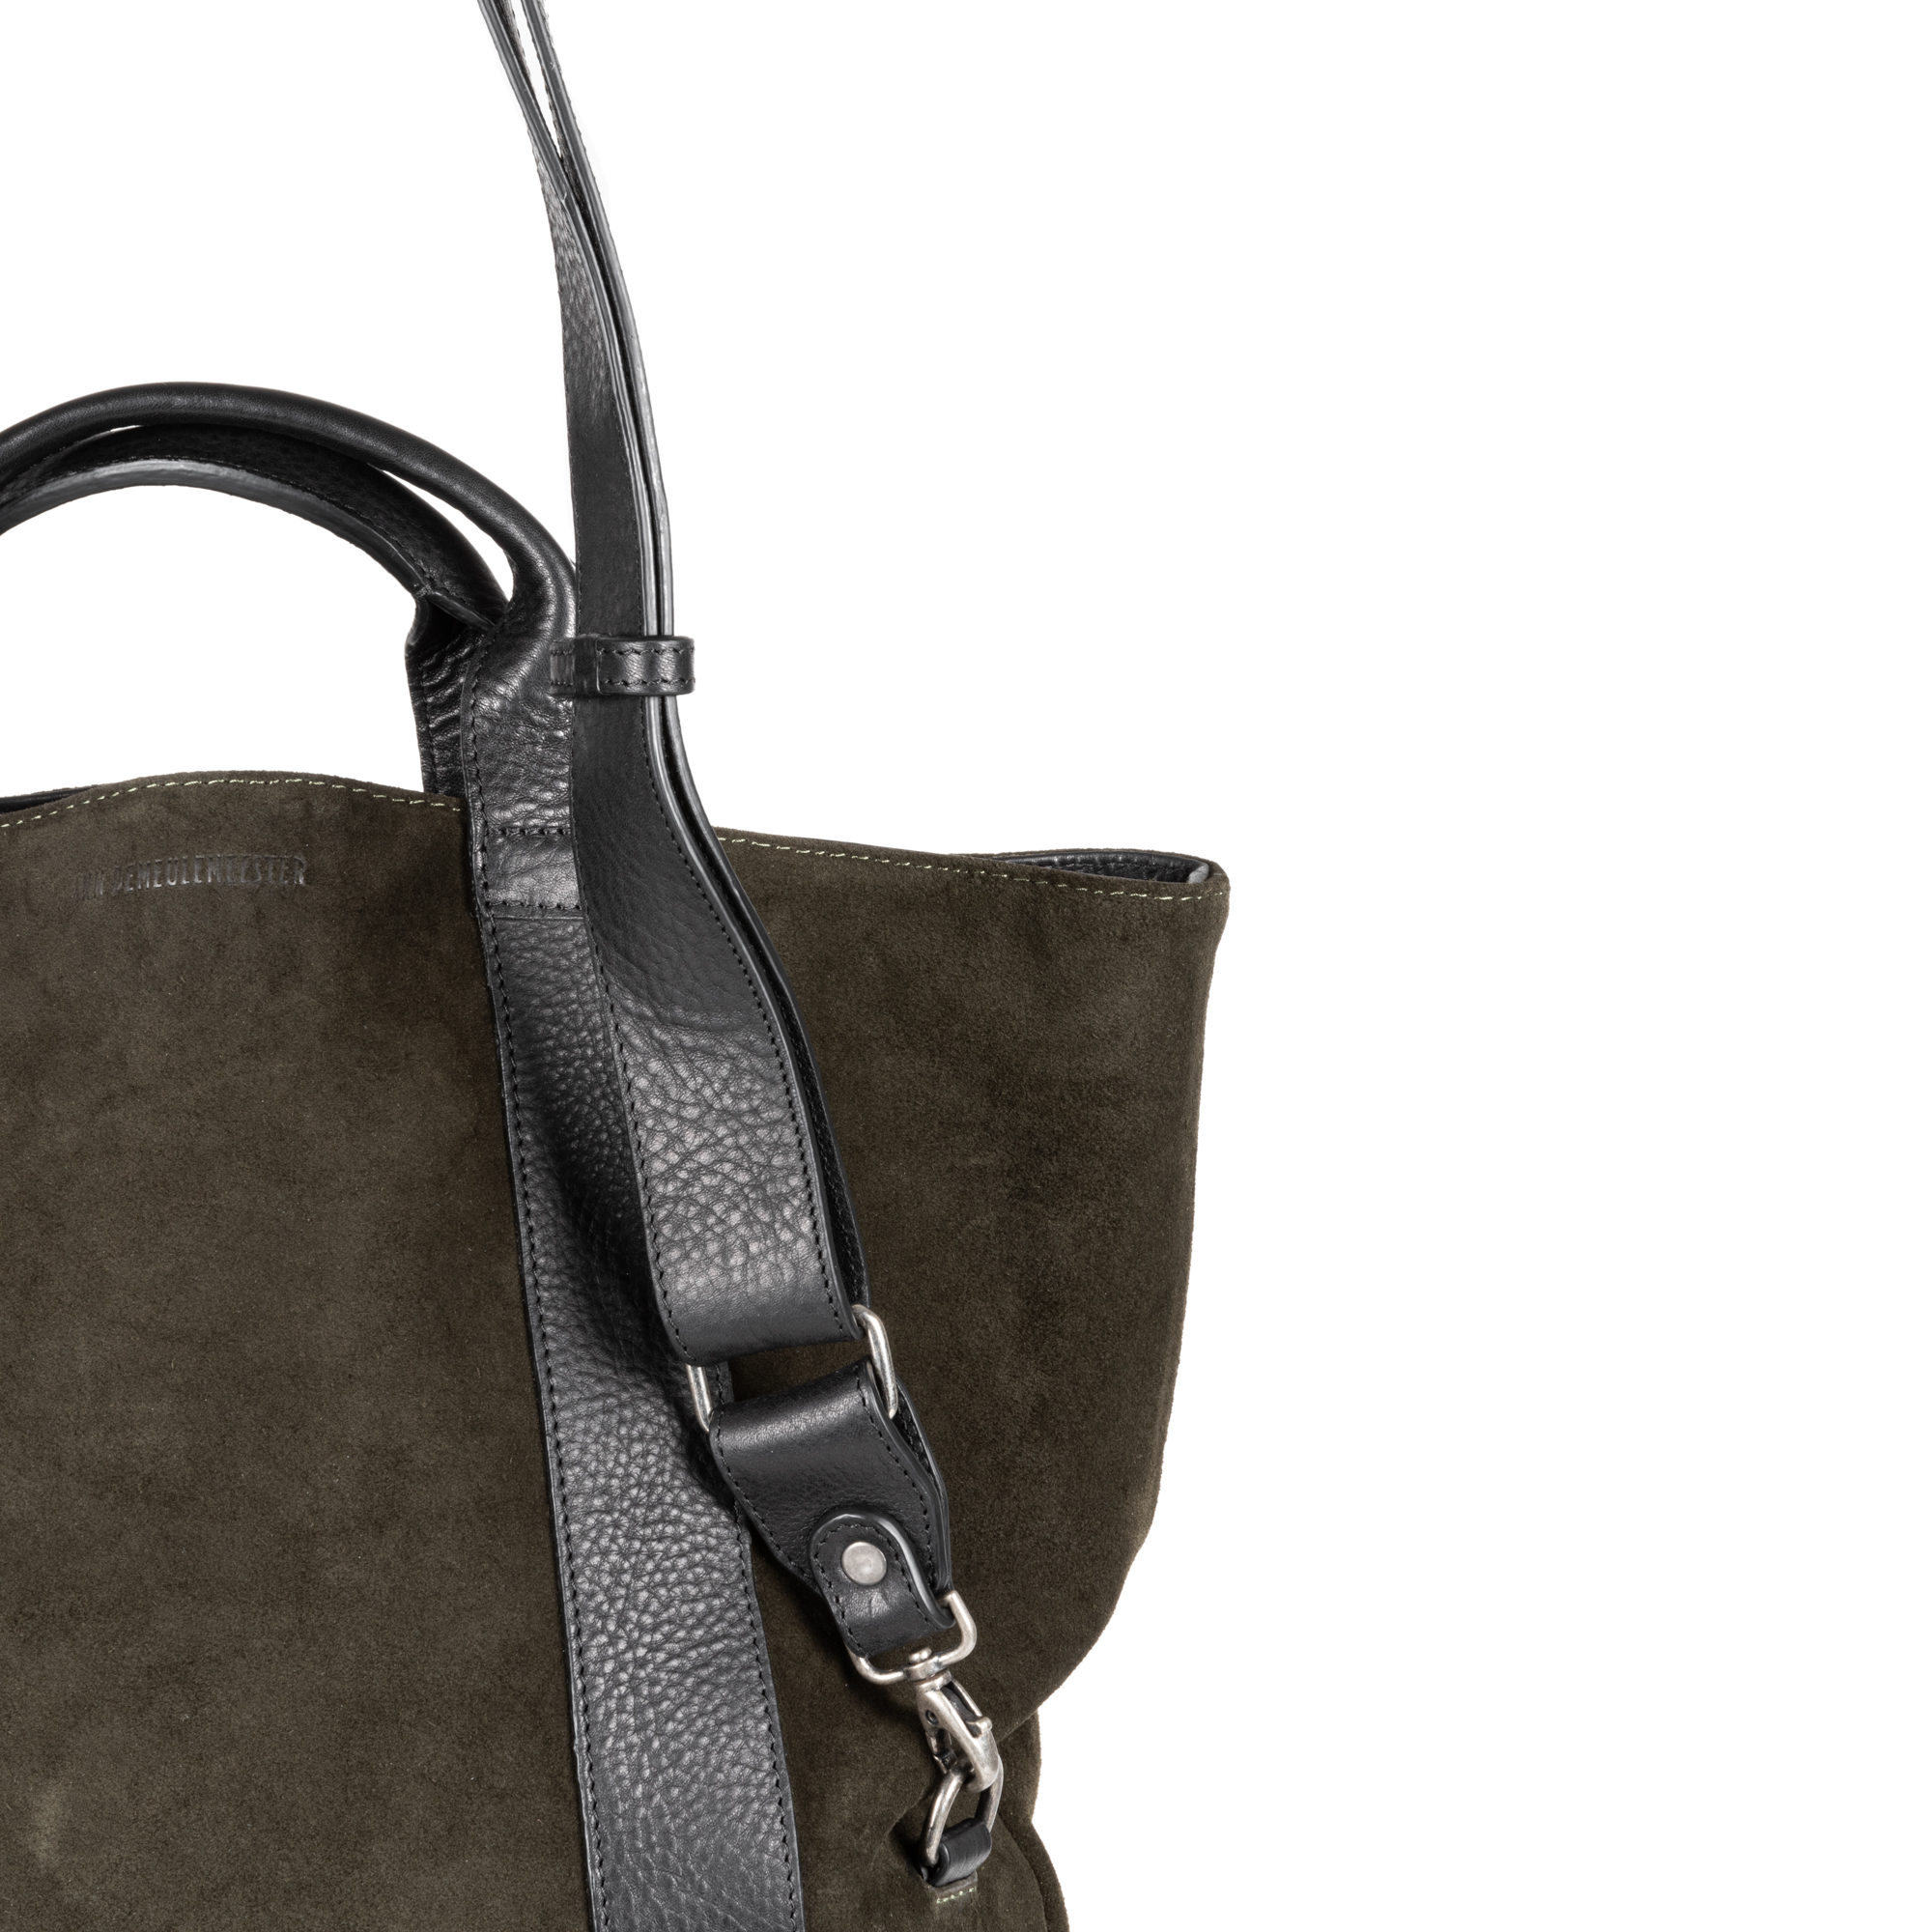 Suede Leather Tote Bag for Woman / Anthracite Leather Shoulder 